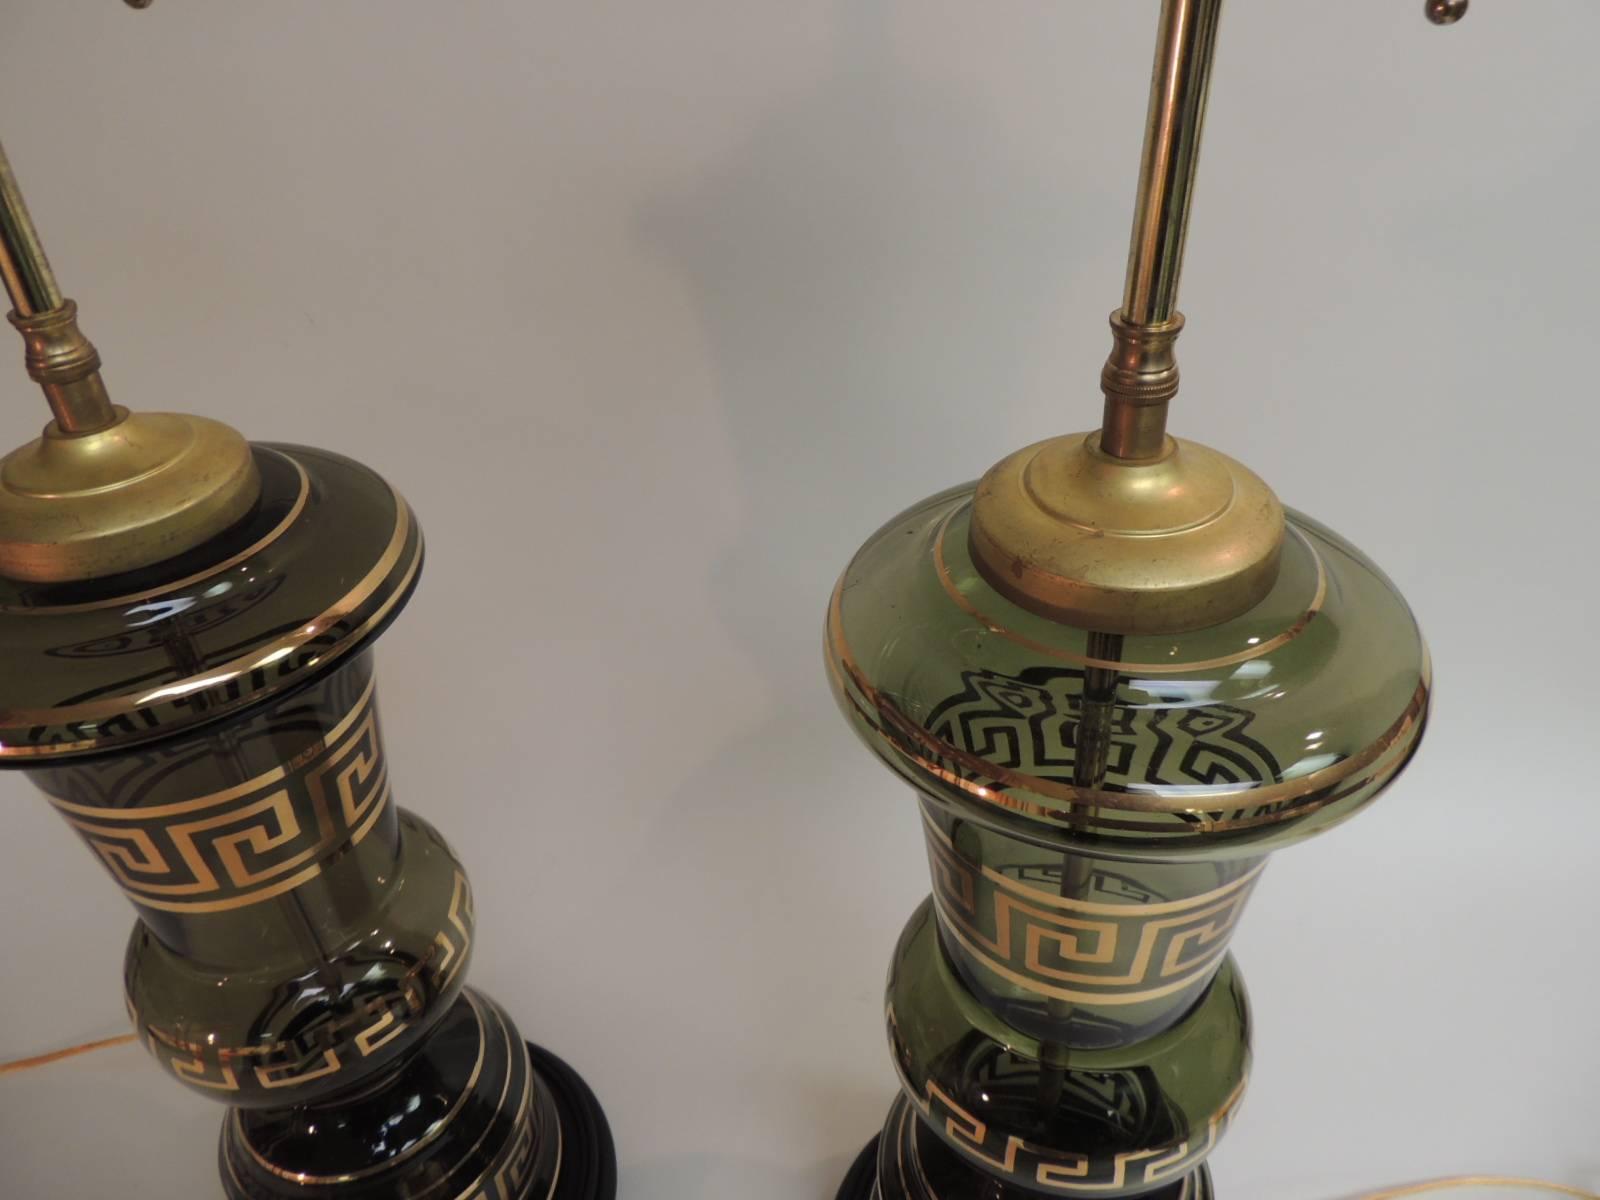 Pair of 1920's hand blown glass tall lamps with hand-painted gold Greek key 
Newly rewired and mounted with round wood bases and polished brass fittings. On and off switch on the sockets and in the plowing wire. Finials are included.
Note: There is